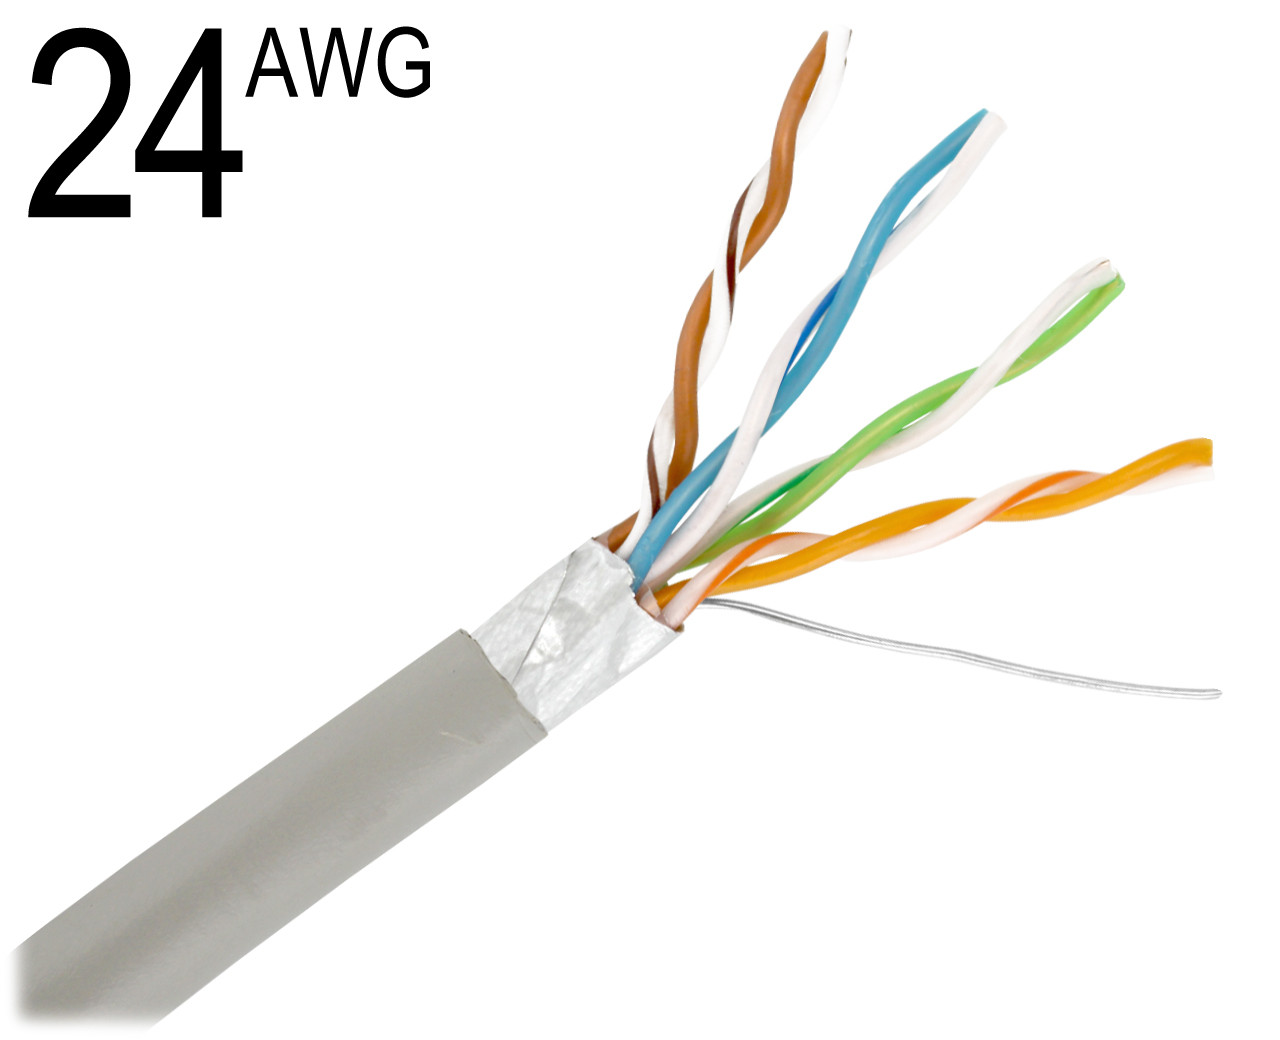 CAT5, 24 AWG, Shielded Solid Bare Copper